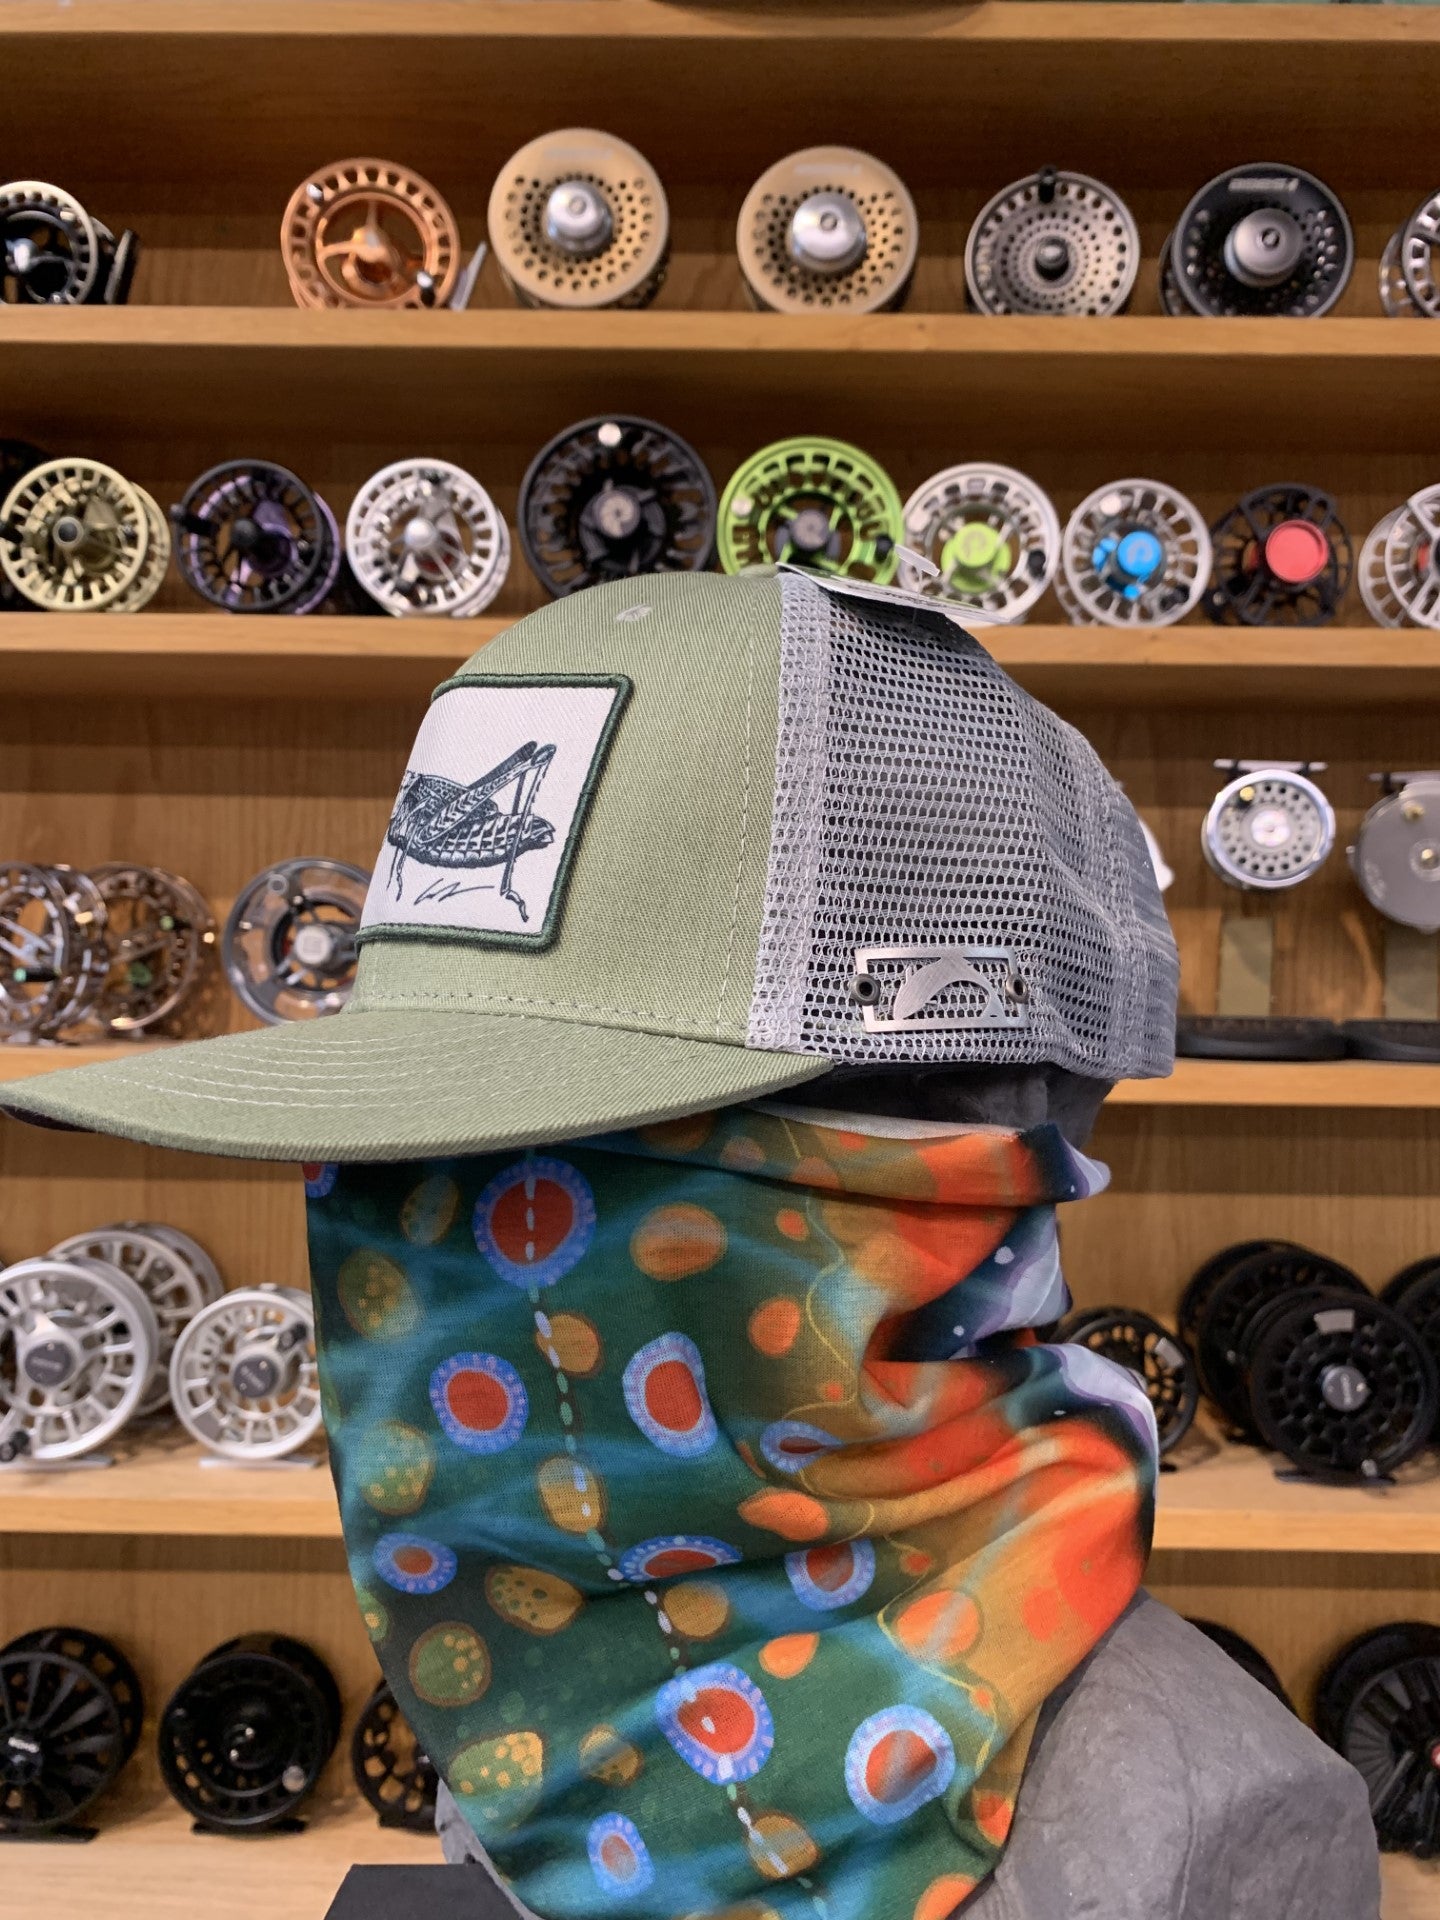 Saltwater Hats – Out Fly Fishing